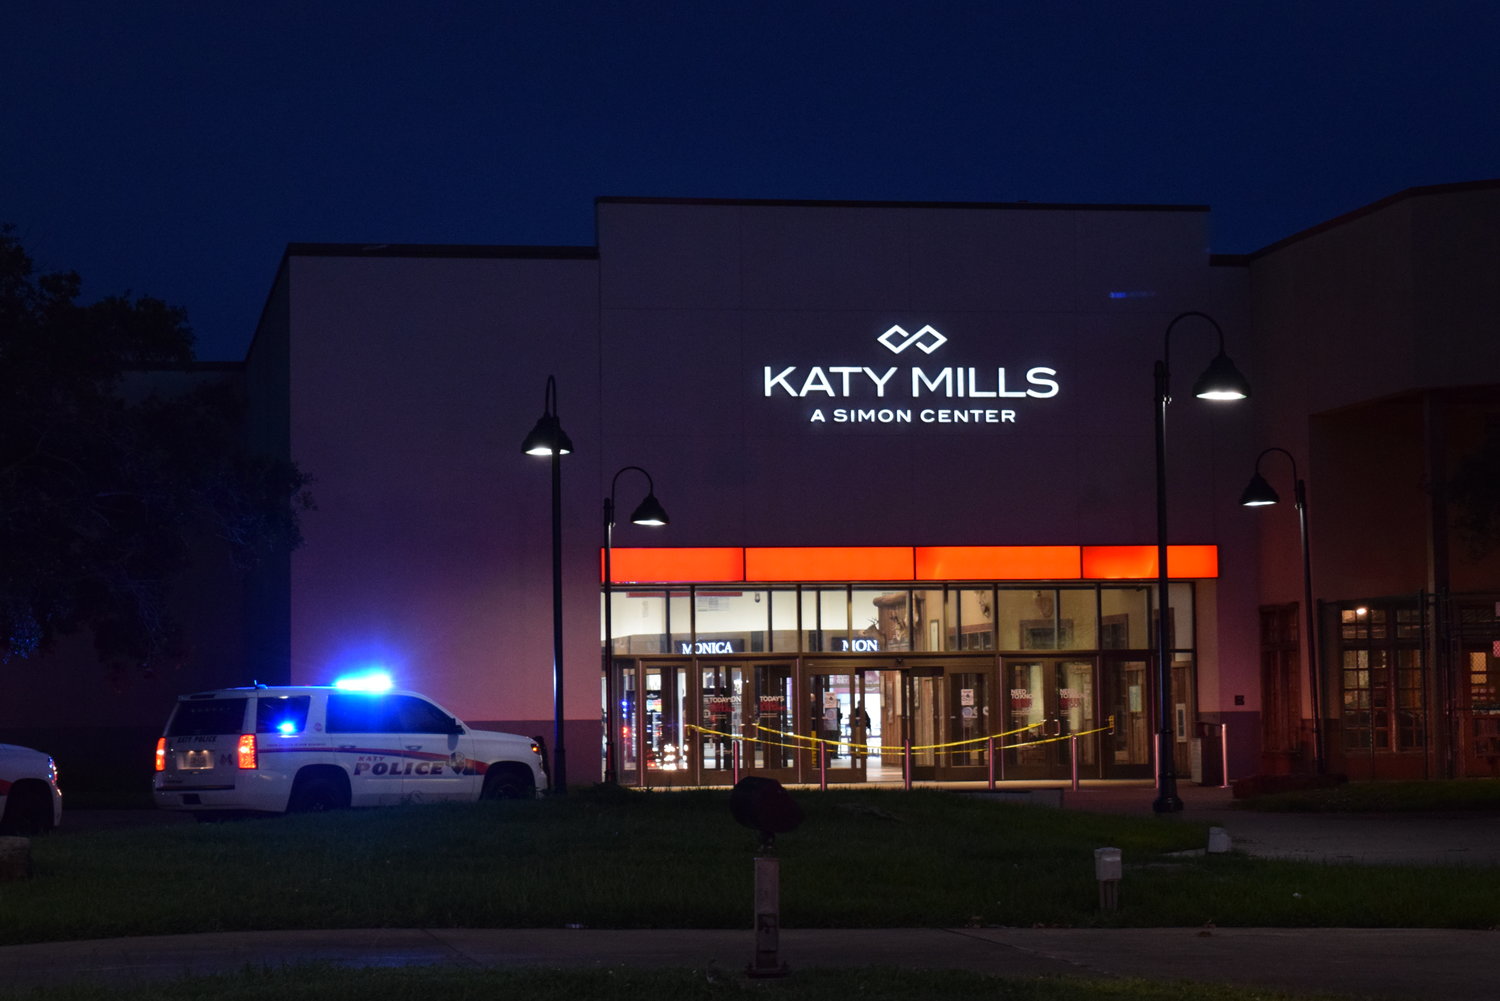 Authorities are searching for two men after they attempted a smash-and-grab robbery at a jewelry store just inside this entrance to Katy Mills Friday evening.